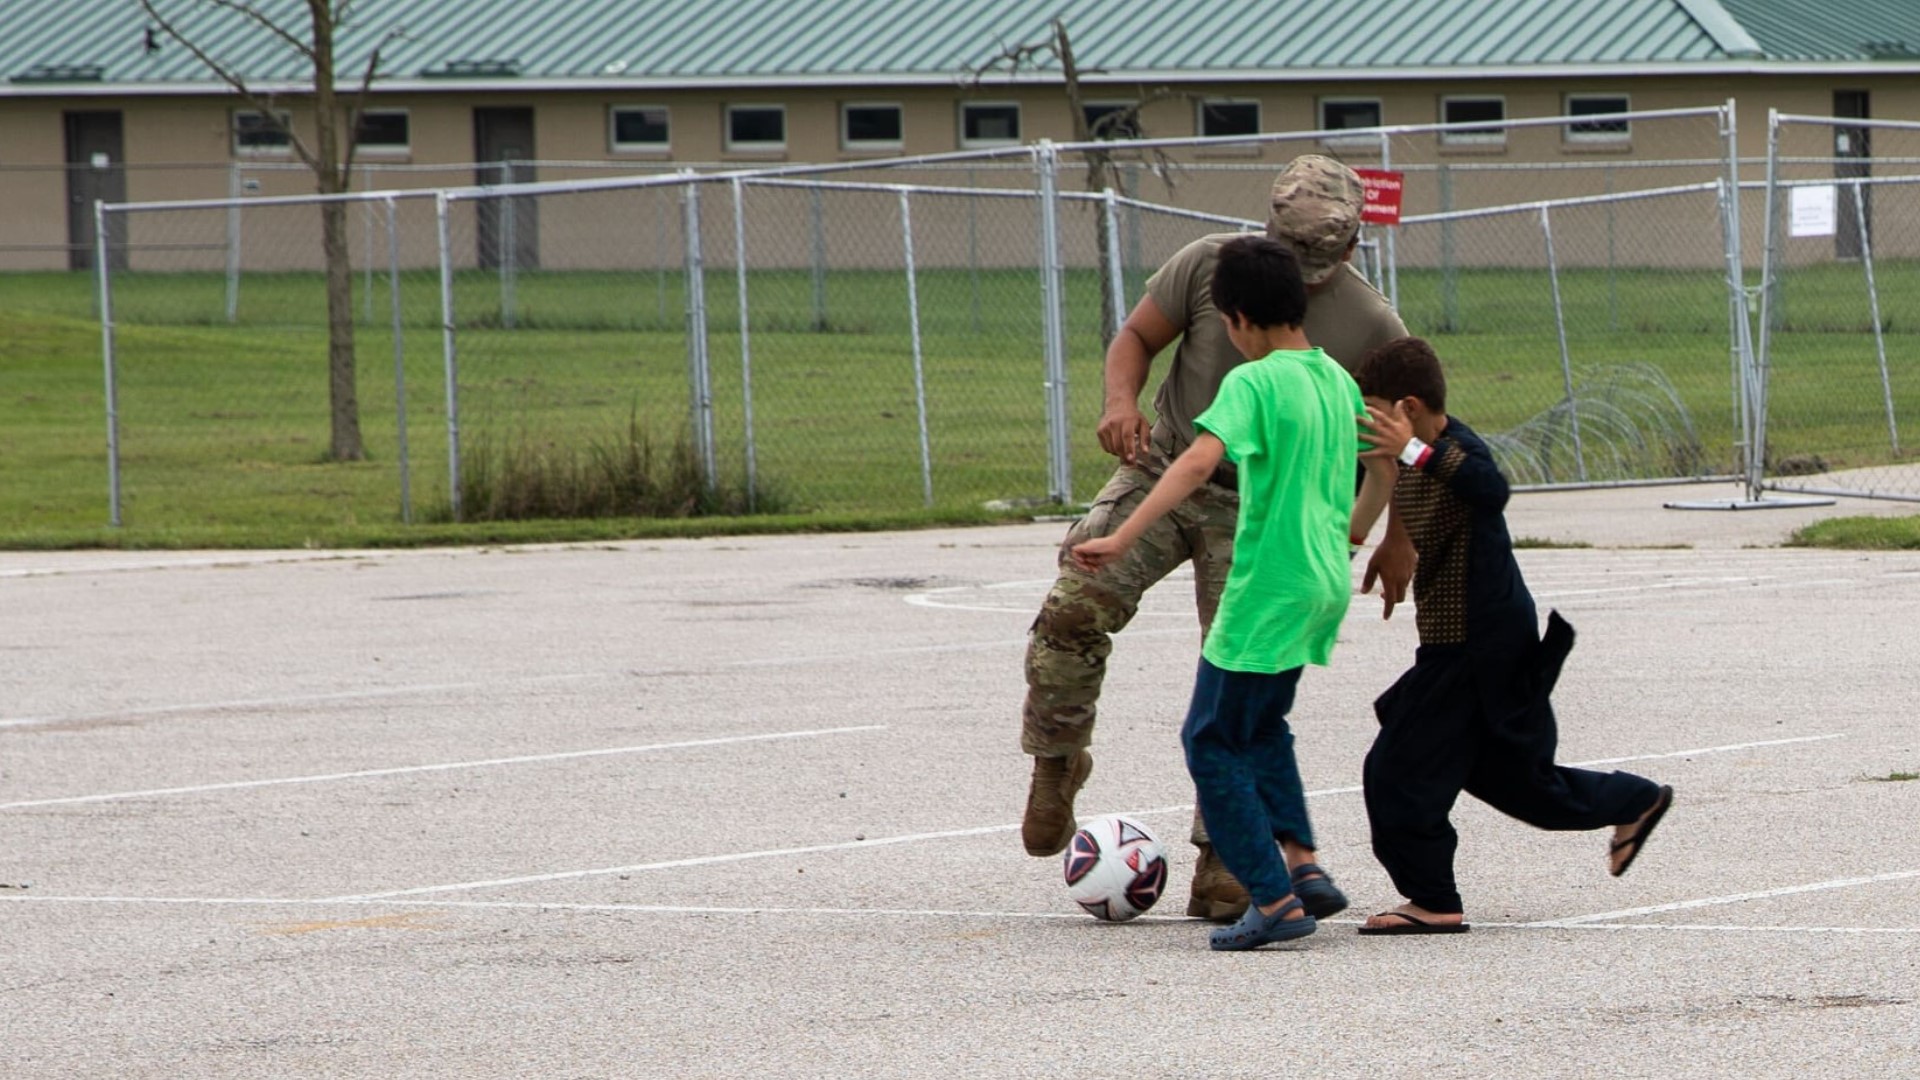 Soldiers at Camp Atterbury gave a group of Afghan children a warm welcome with a friendly soccer match on Saturday.